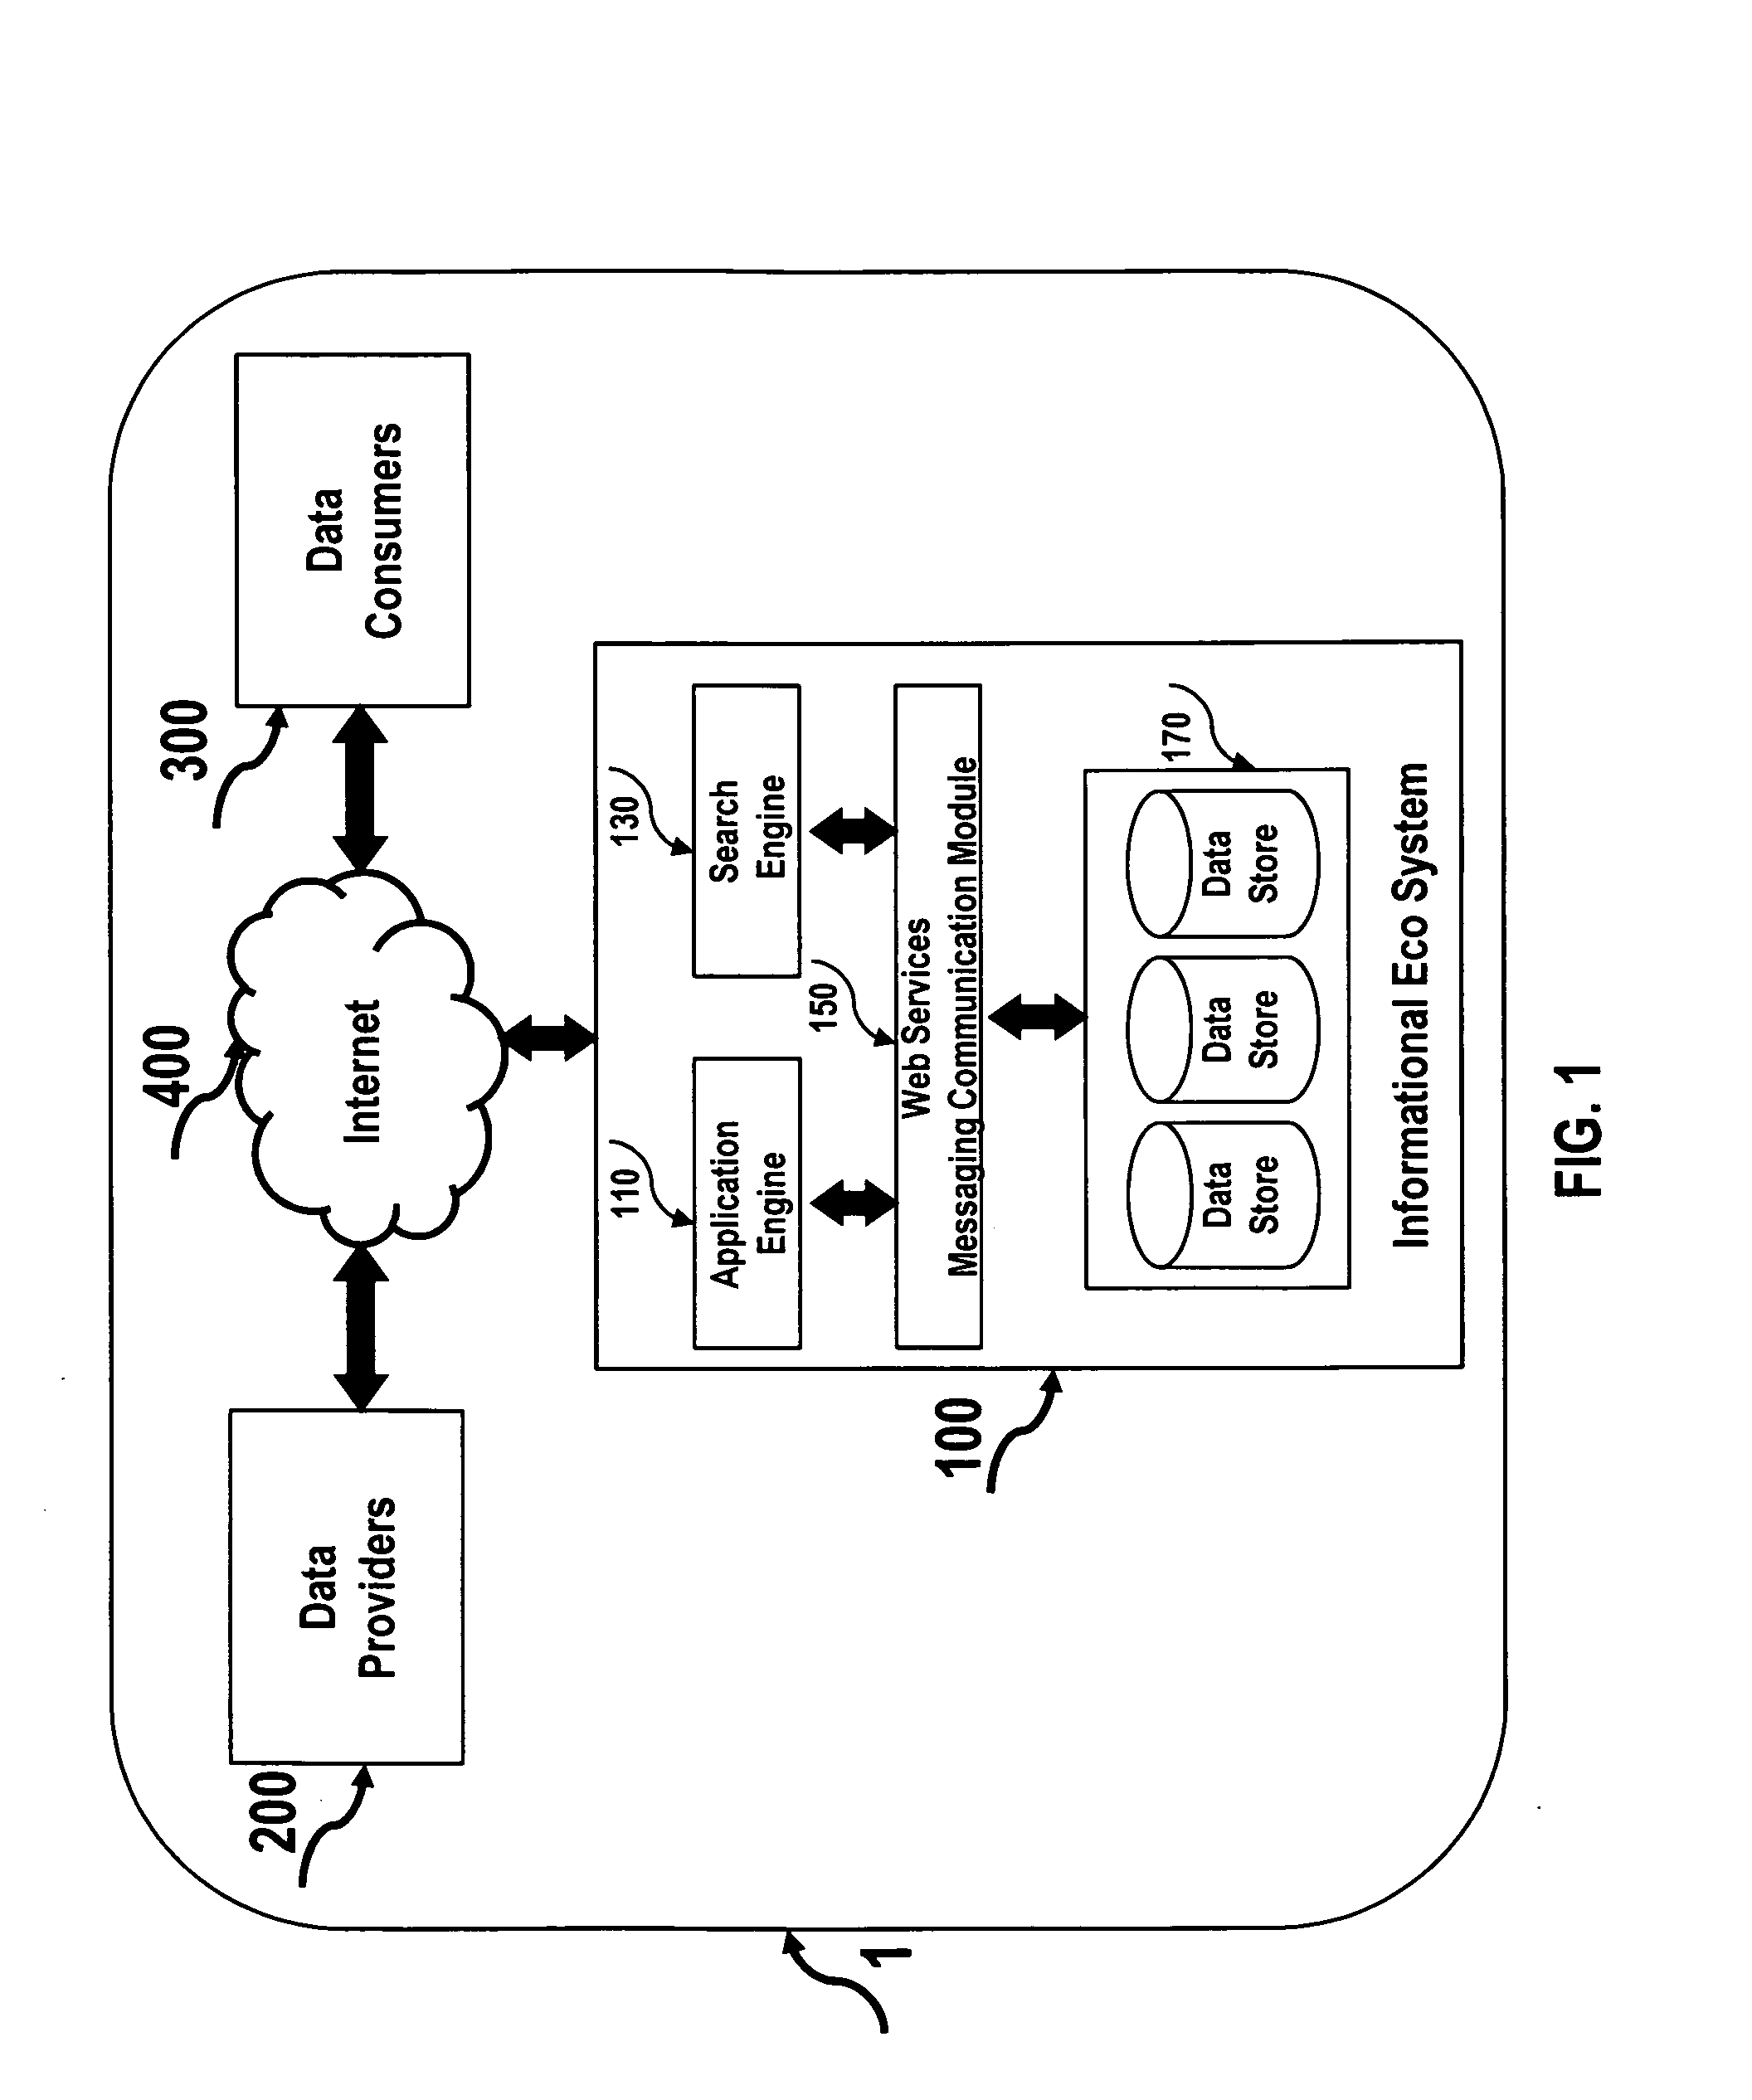 Internet eco system for transacting information and transactional data for compensation